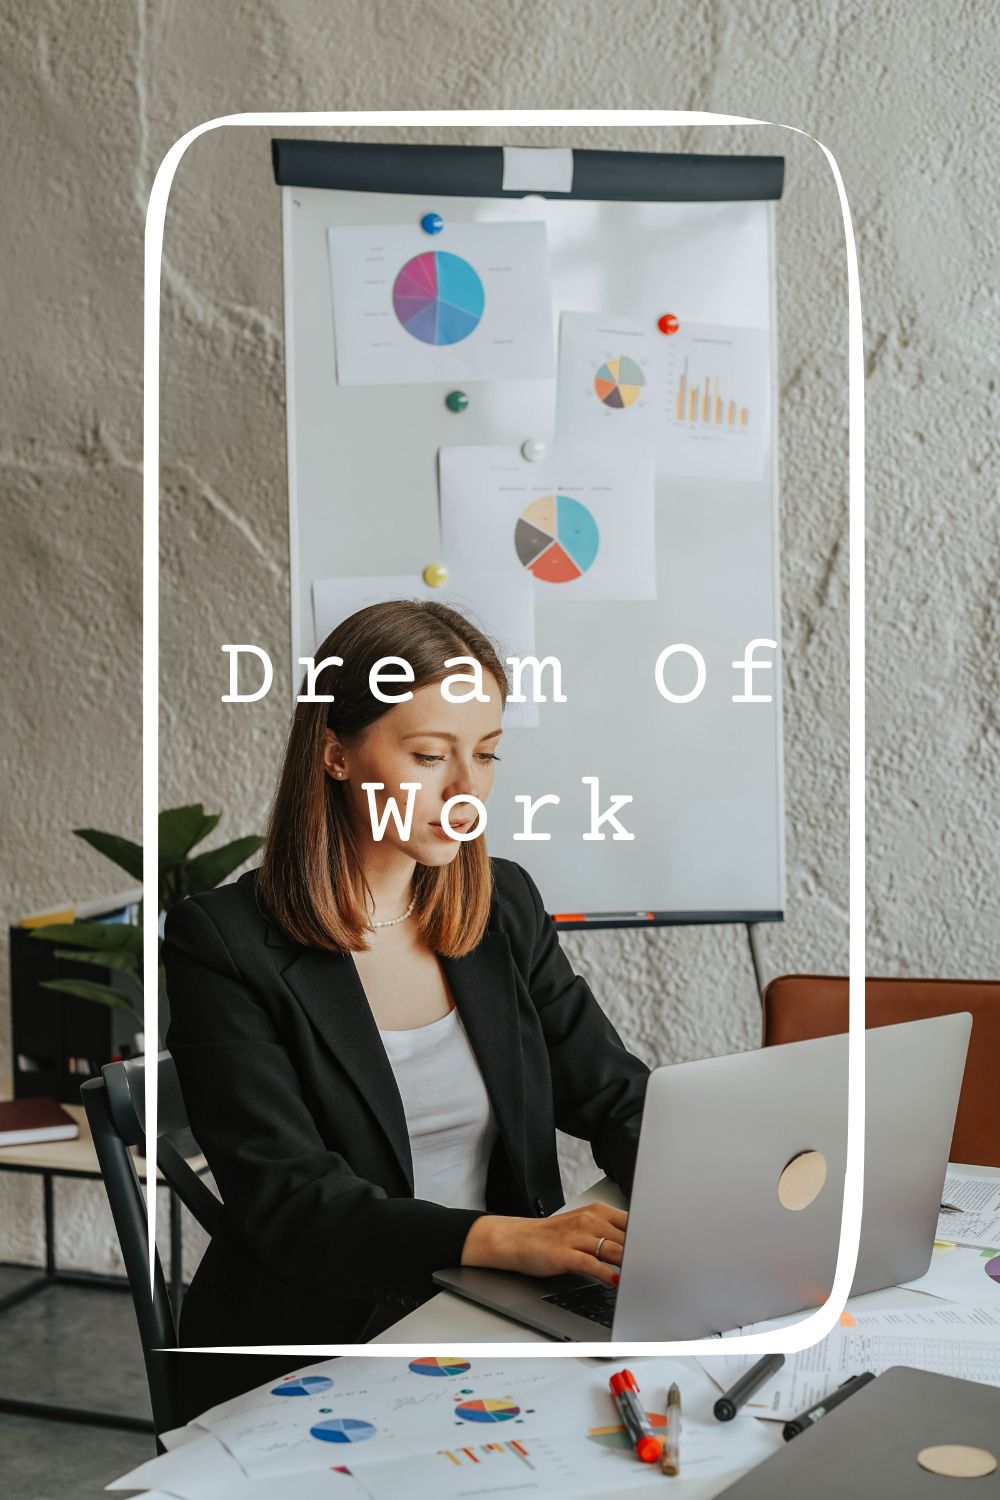 Dream Of Work Meanings 1